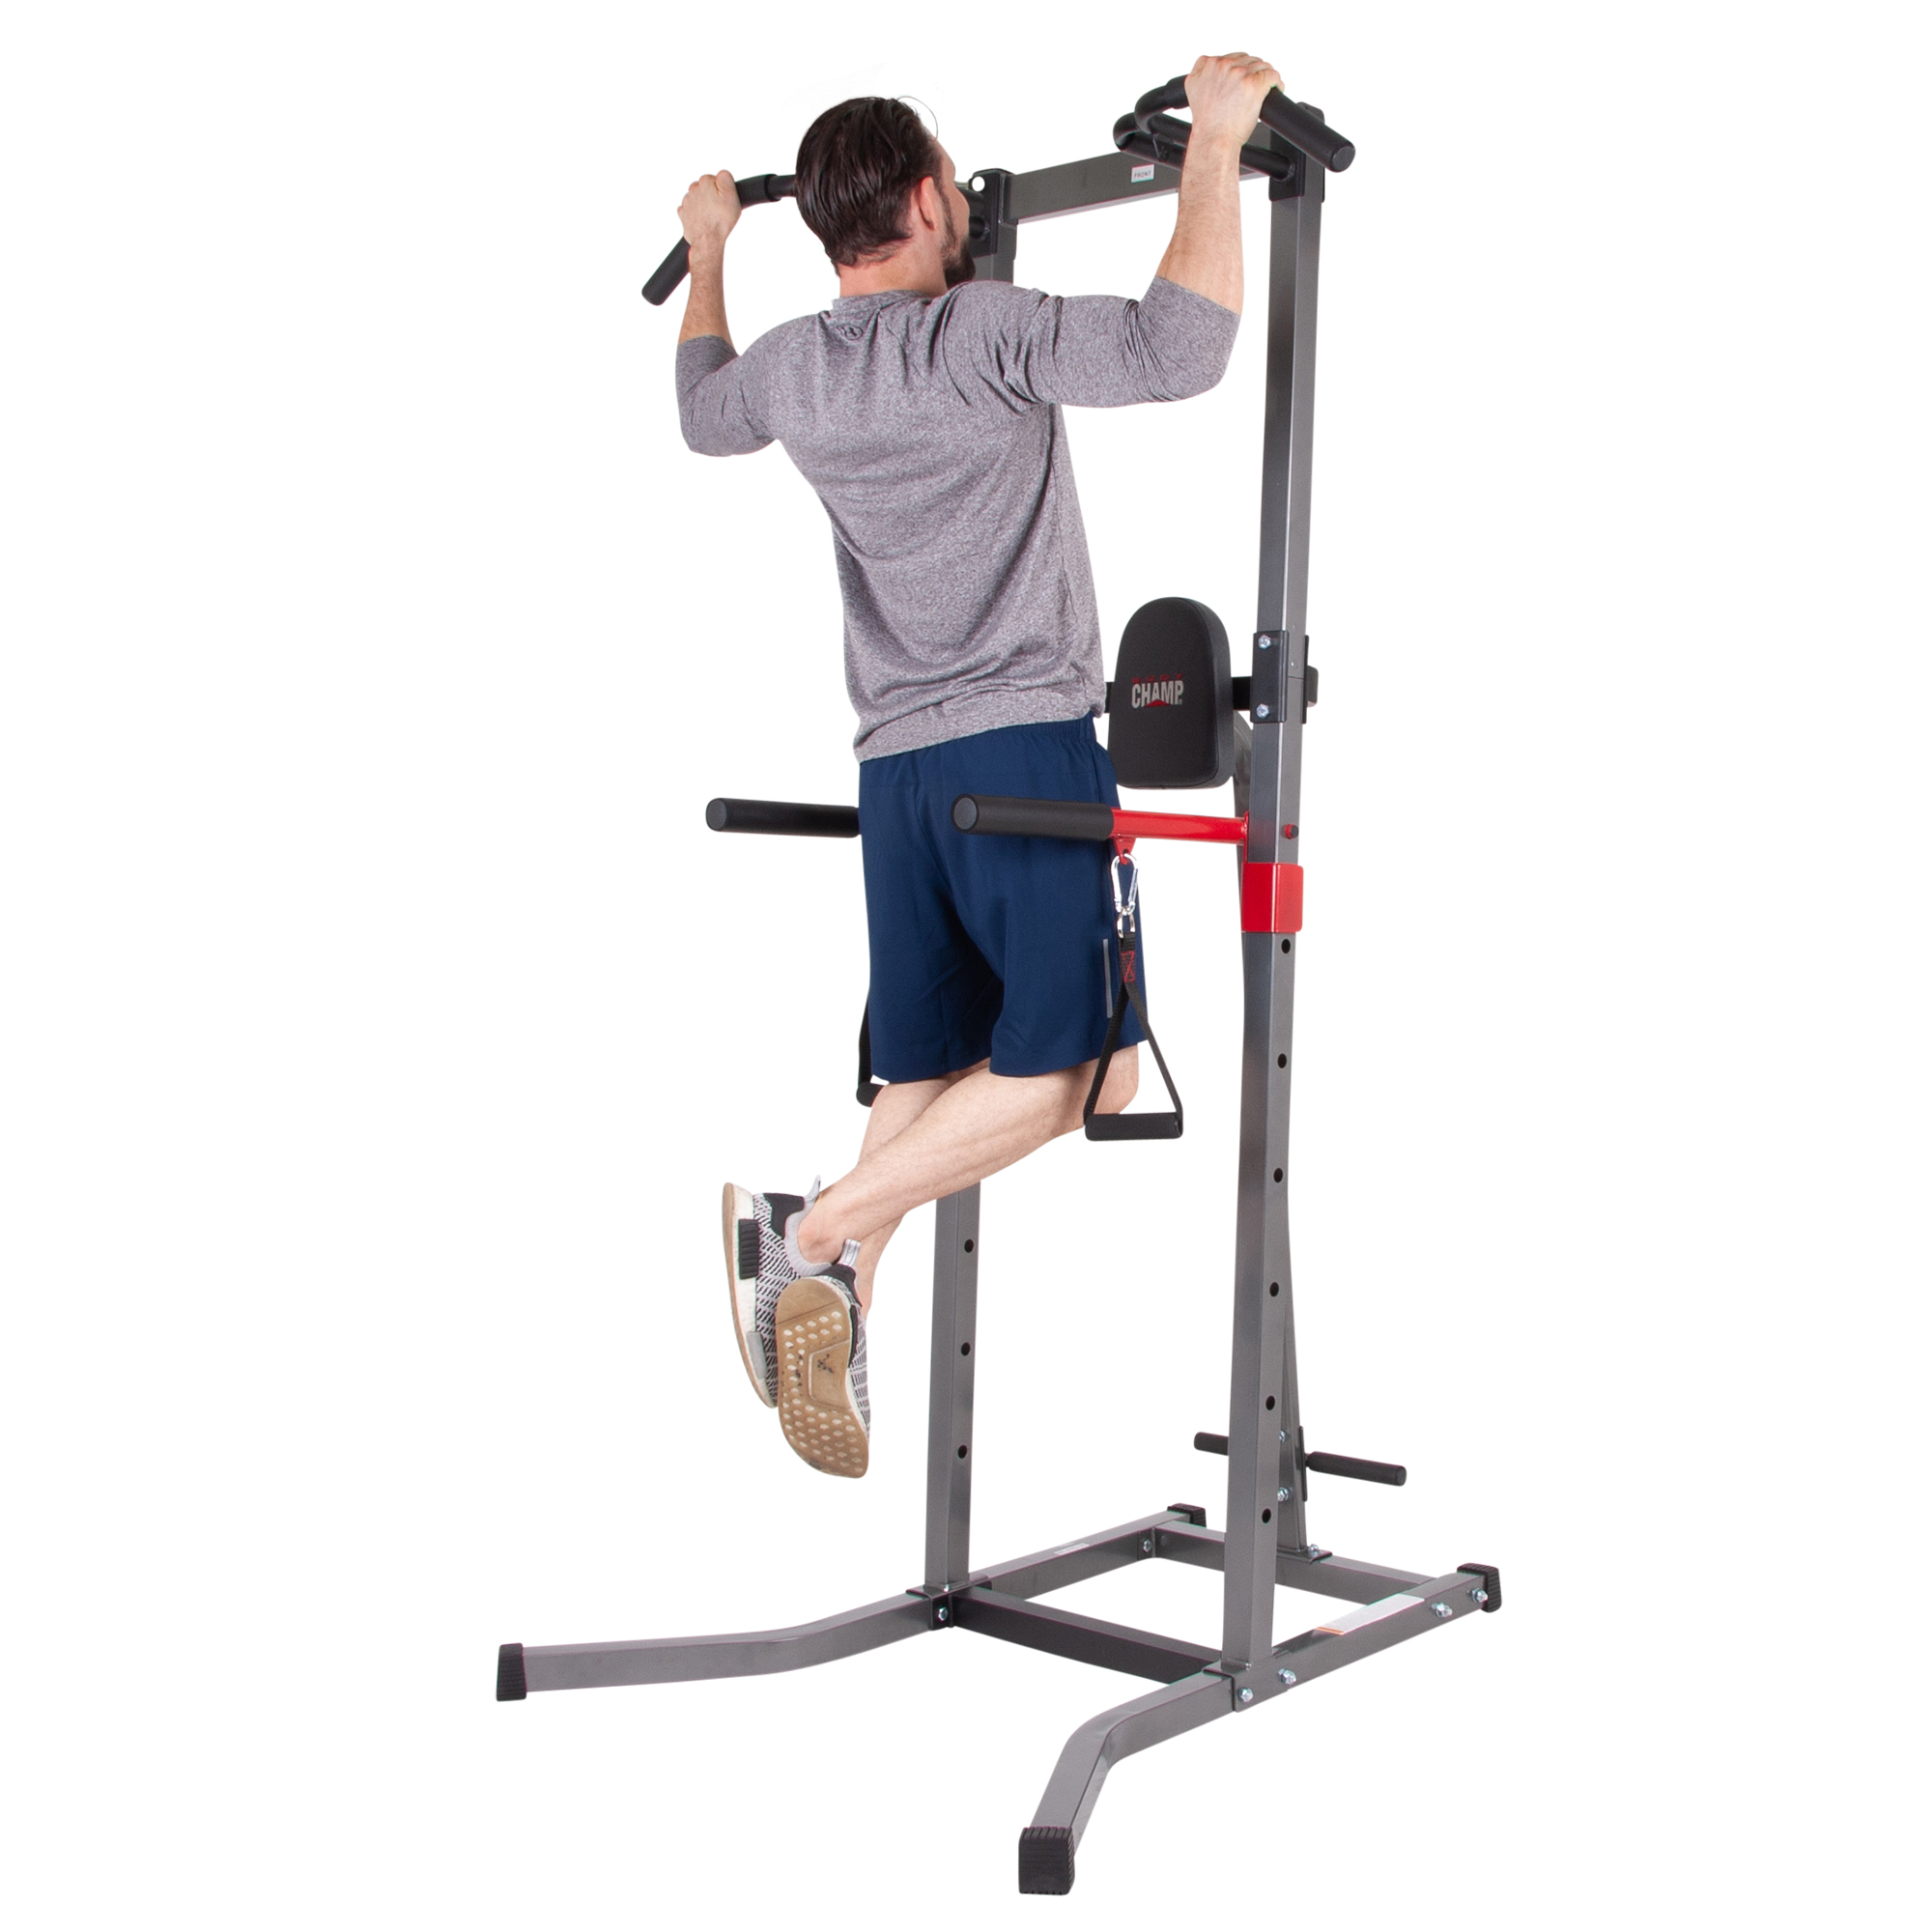 Body Champ VKR2078 5-in-1 Power Tower and Dip Station, Home Gym Equipment - image 3 of 9